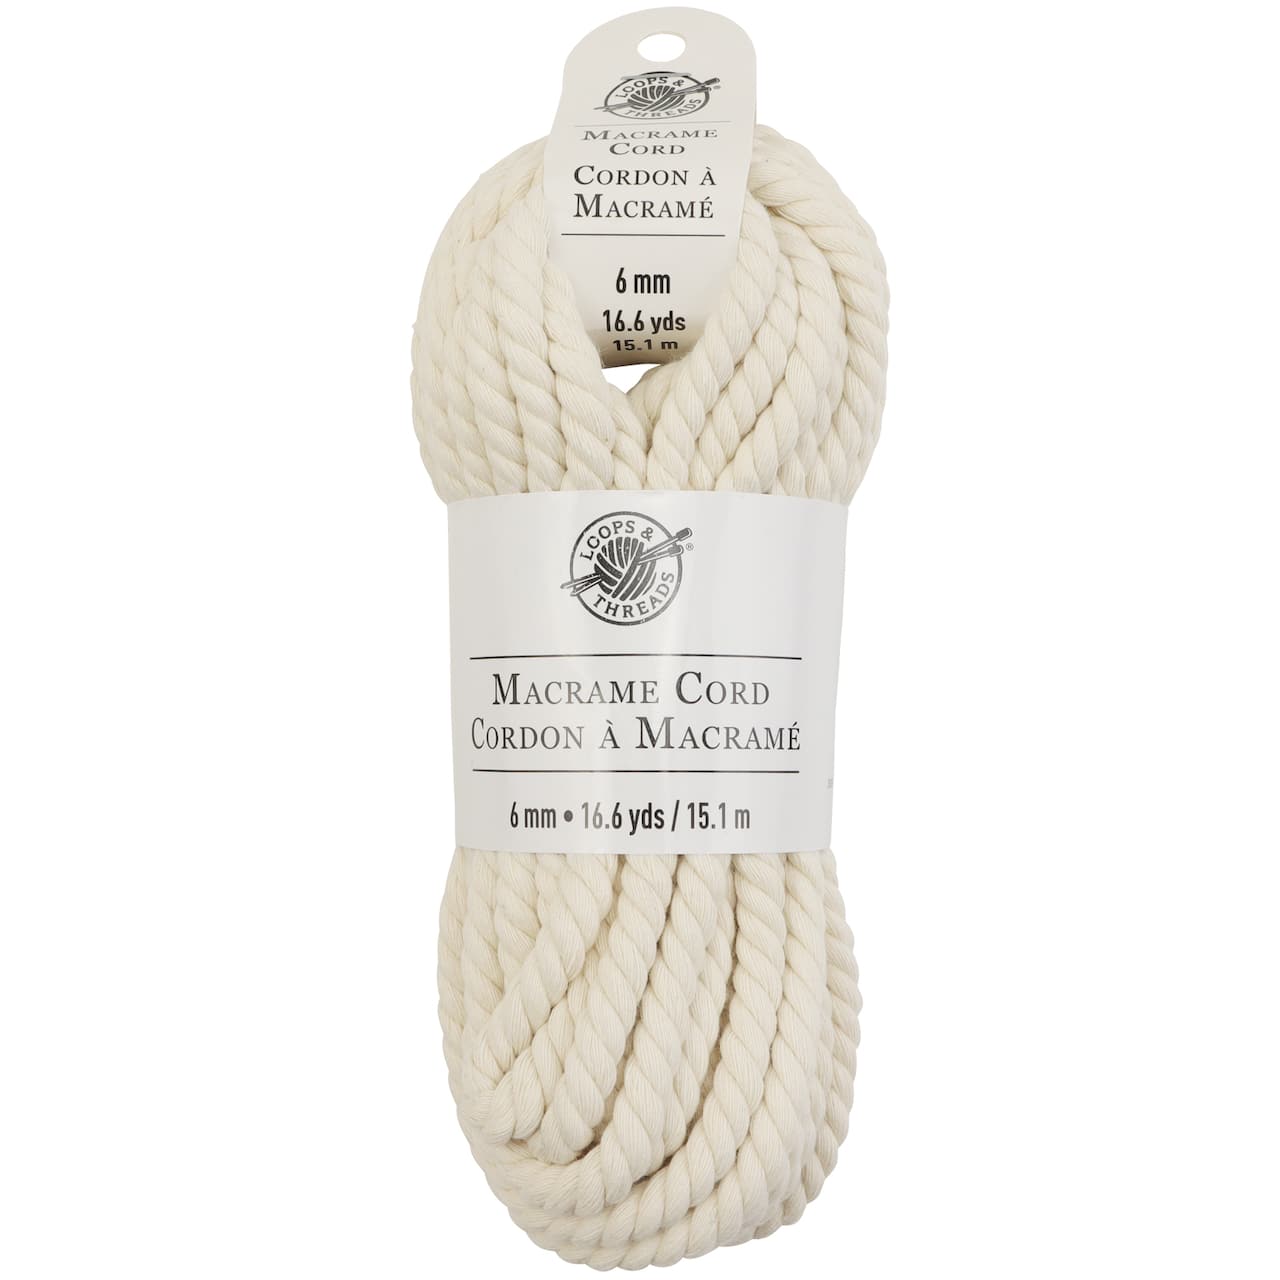 Macramé Cotton Cord by Loops & Threads®, 50ft.